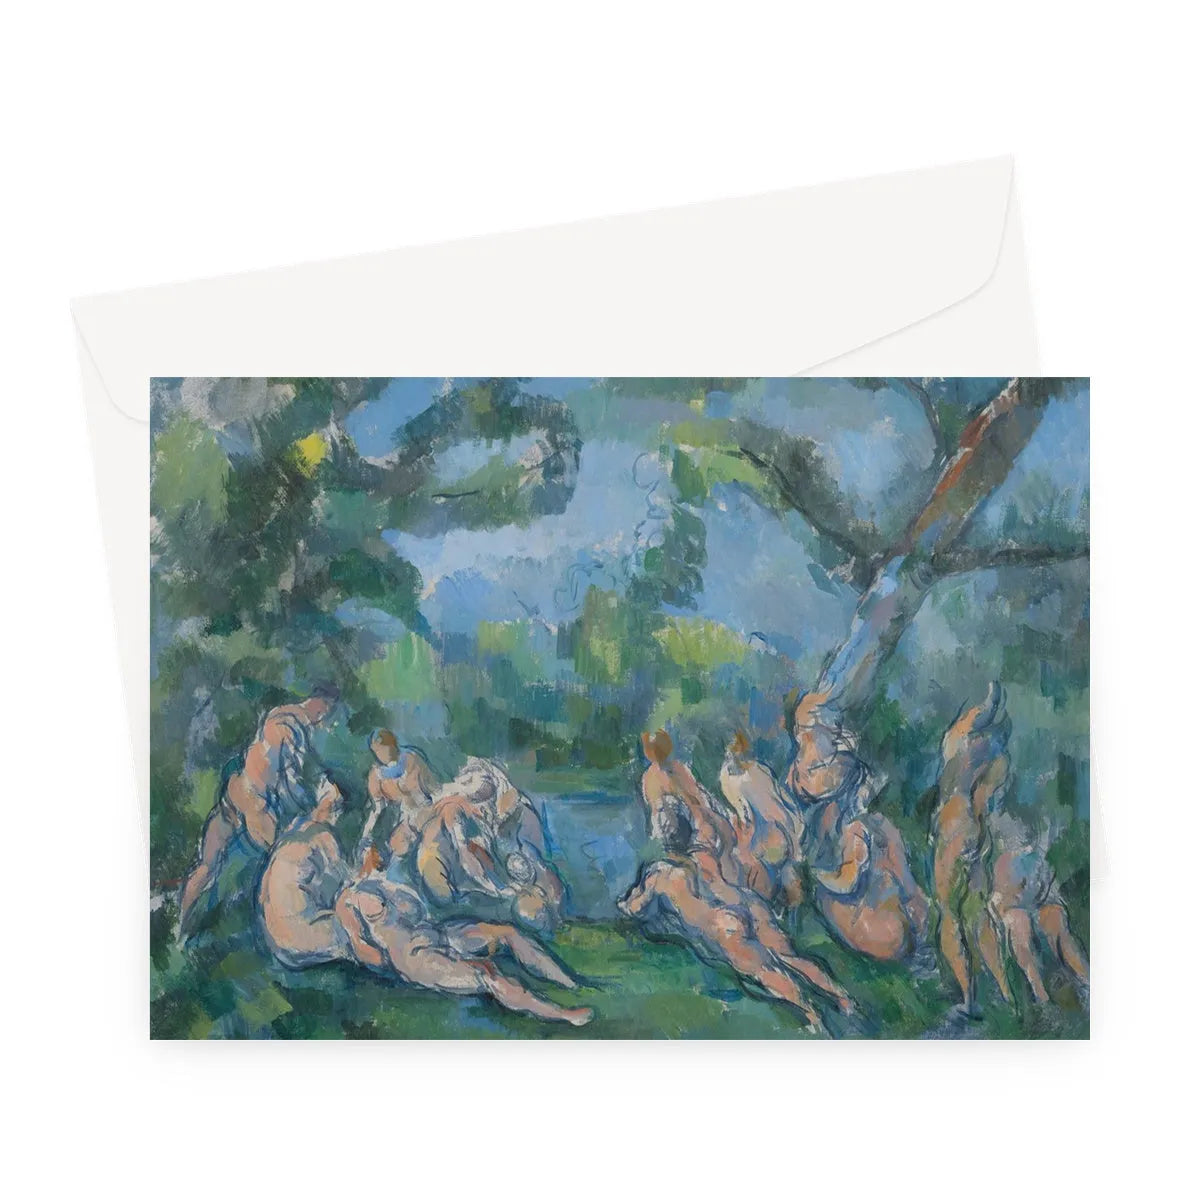 The Bathers By Paul Cezanne Greeting Card - A5 Landscape / 1 Card - Greeting & Note Cards - Aesthetic Art